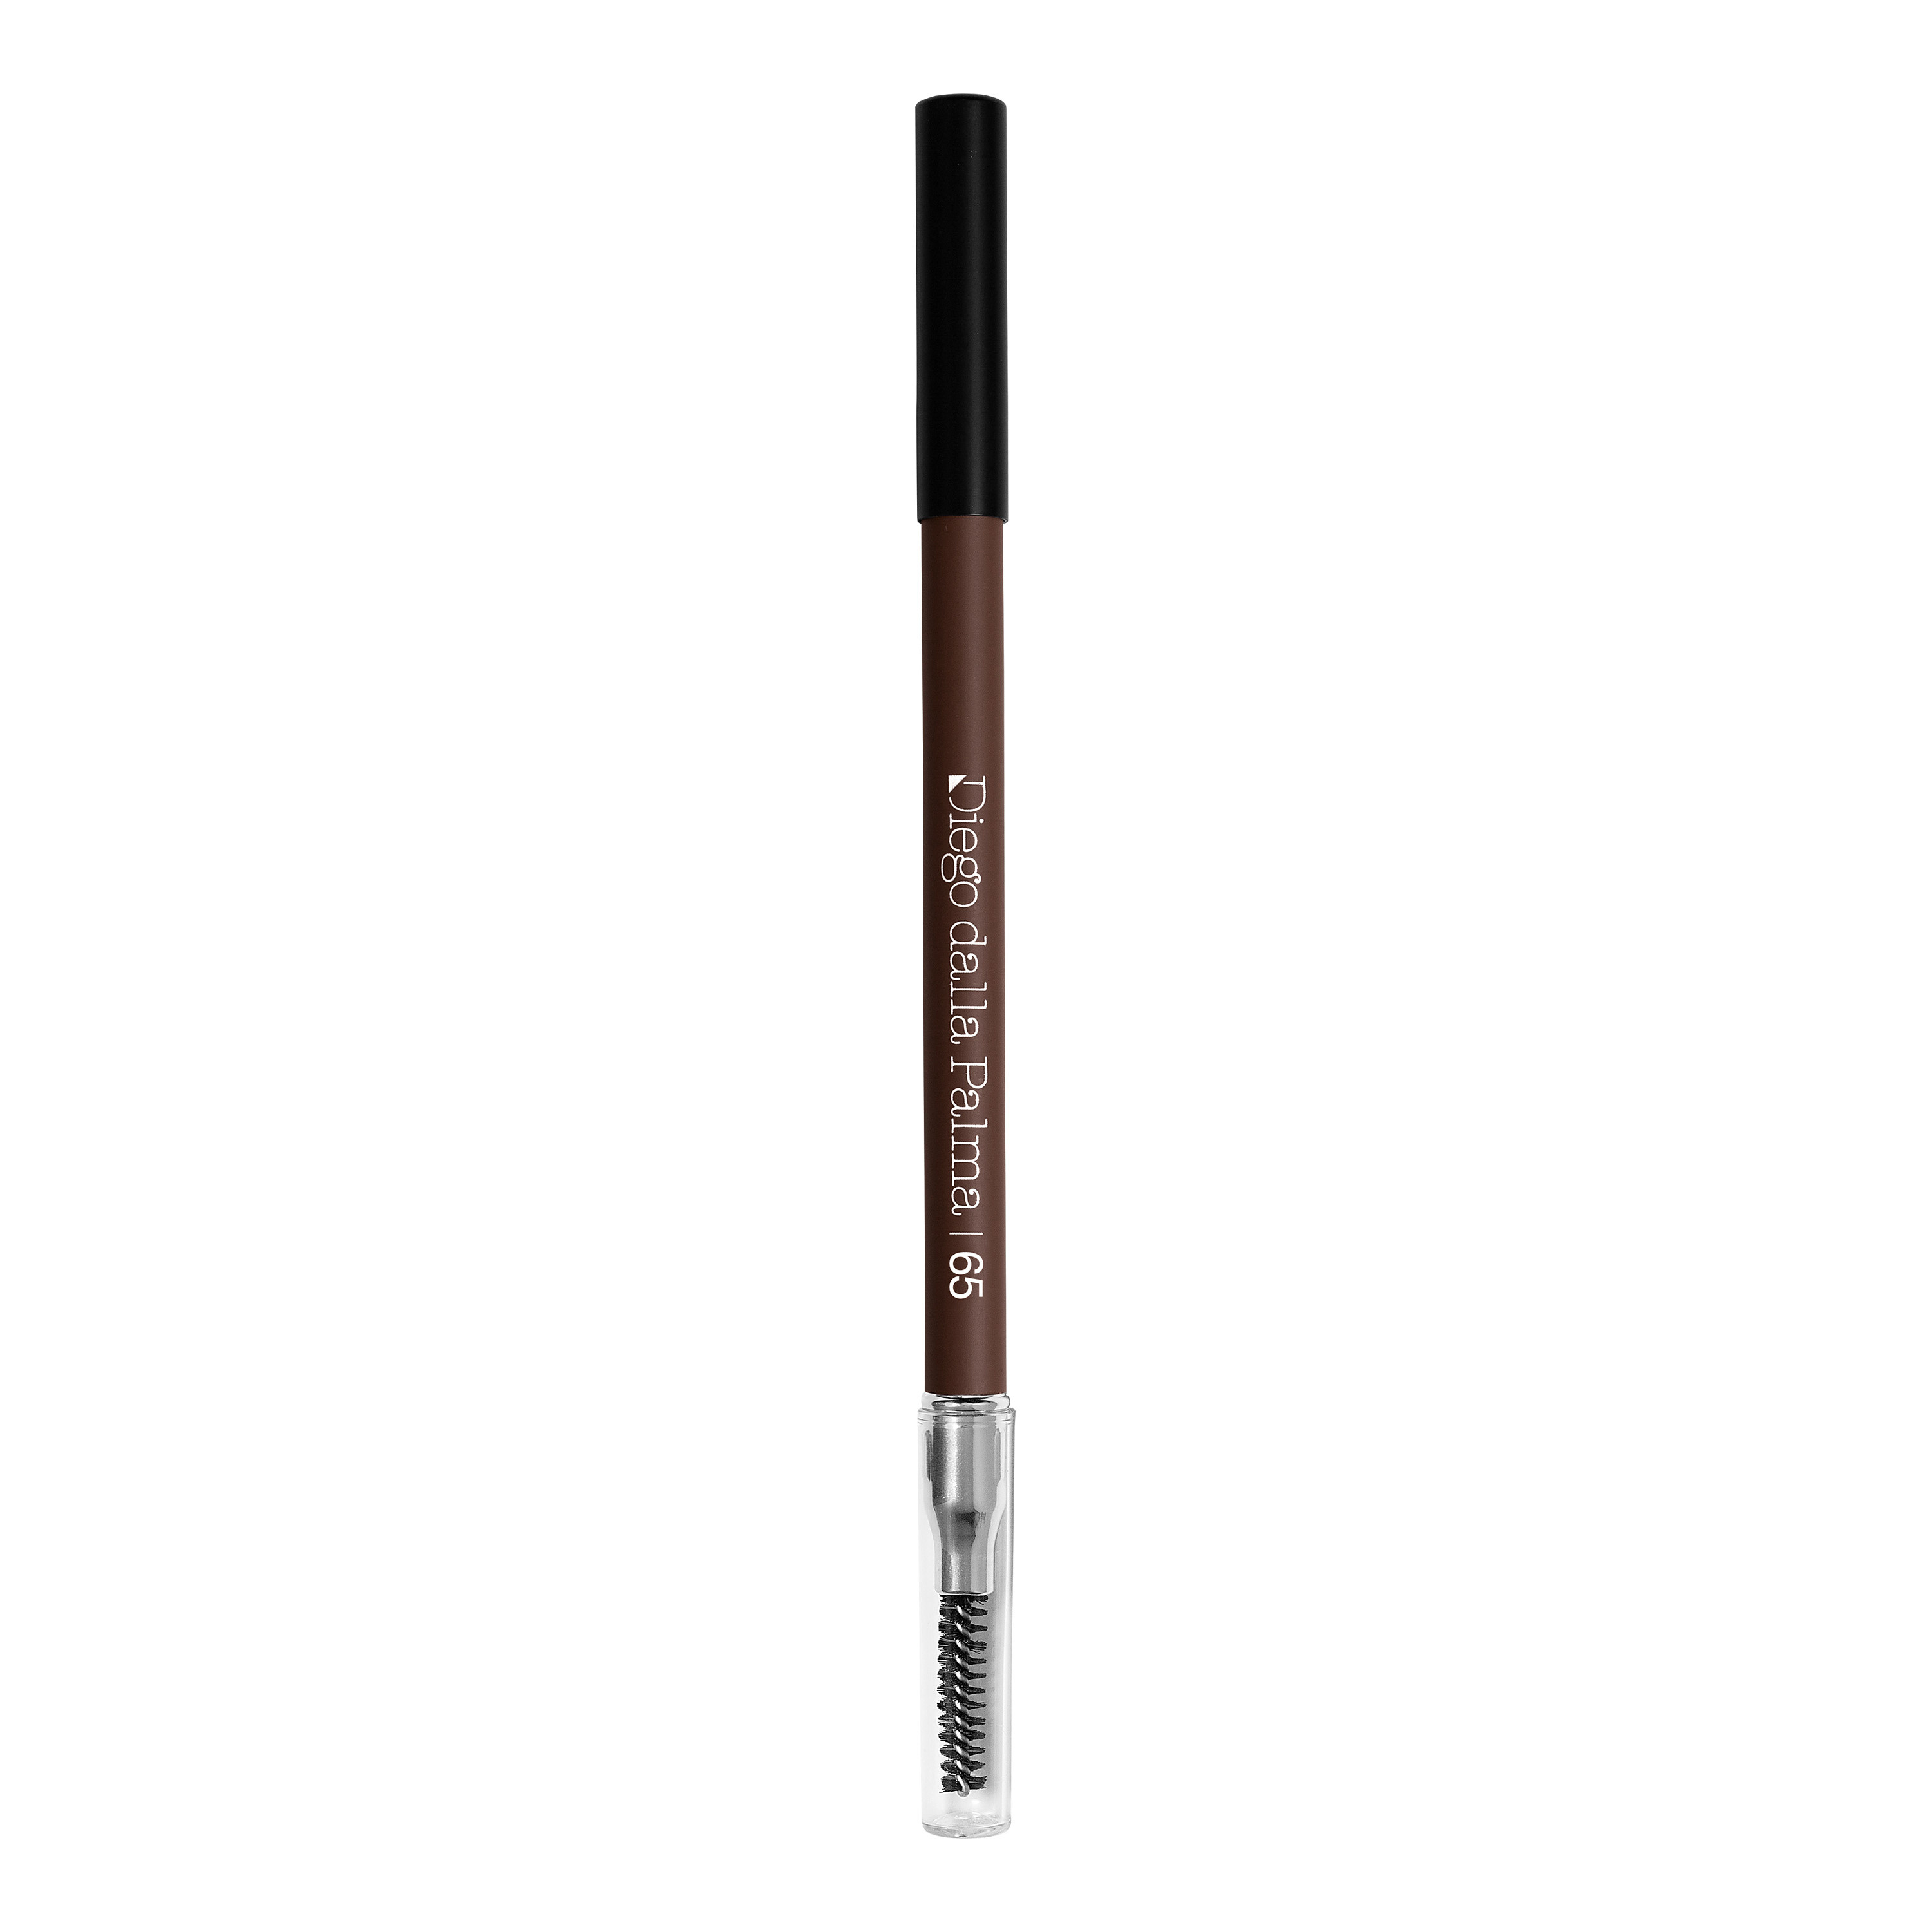 Powder Pencil For Eyebrows - 65 anthracite, Anthracite, large image number 1